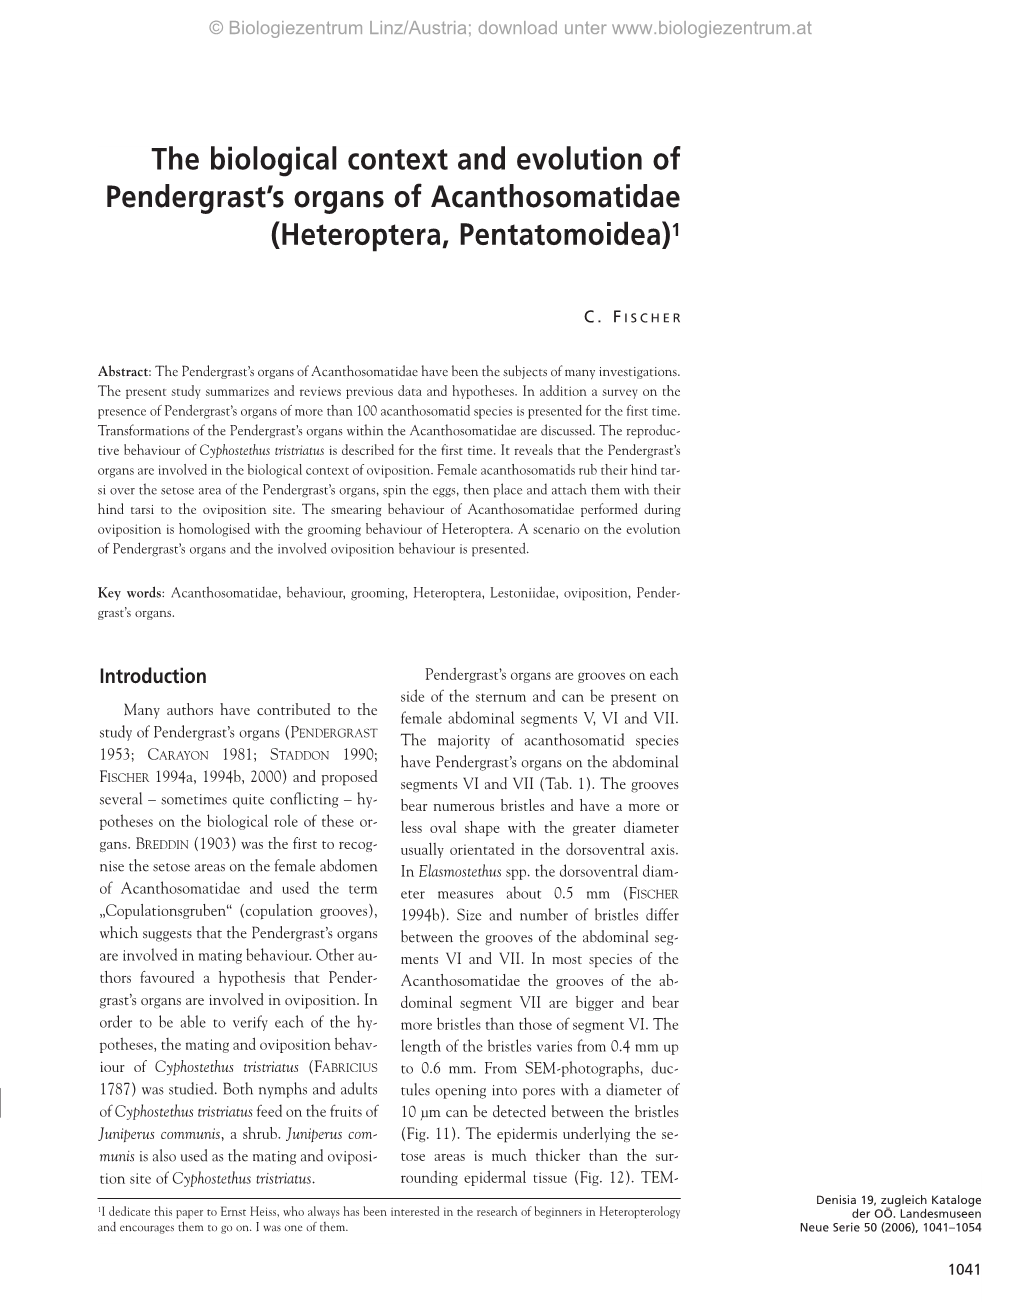 The Biological Context and Evolution of Pendergrast's Organs Of